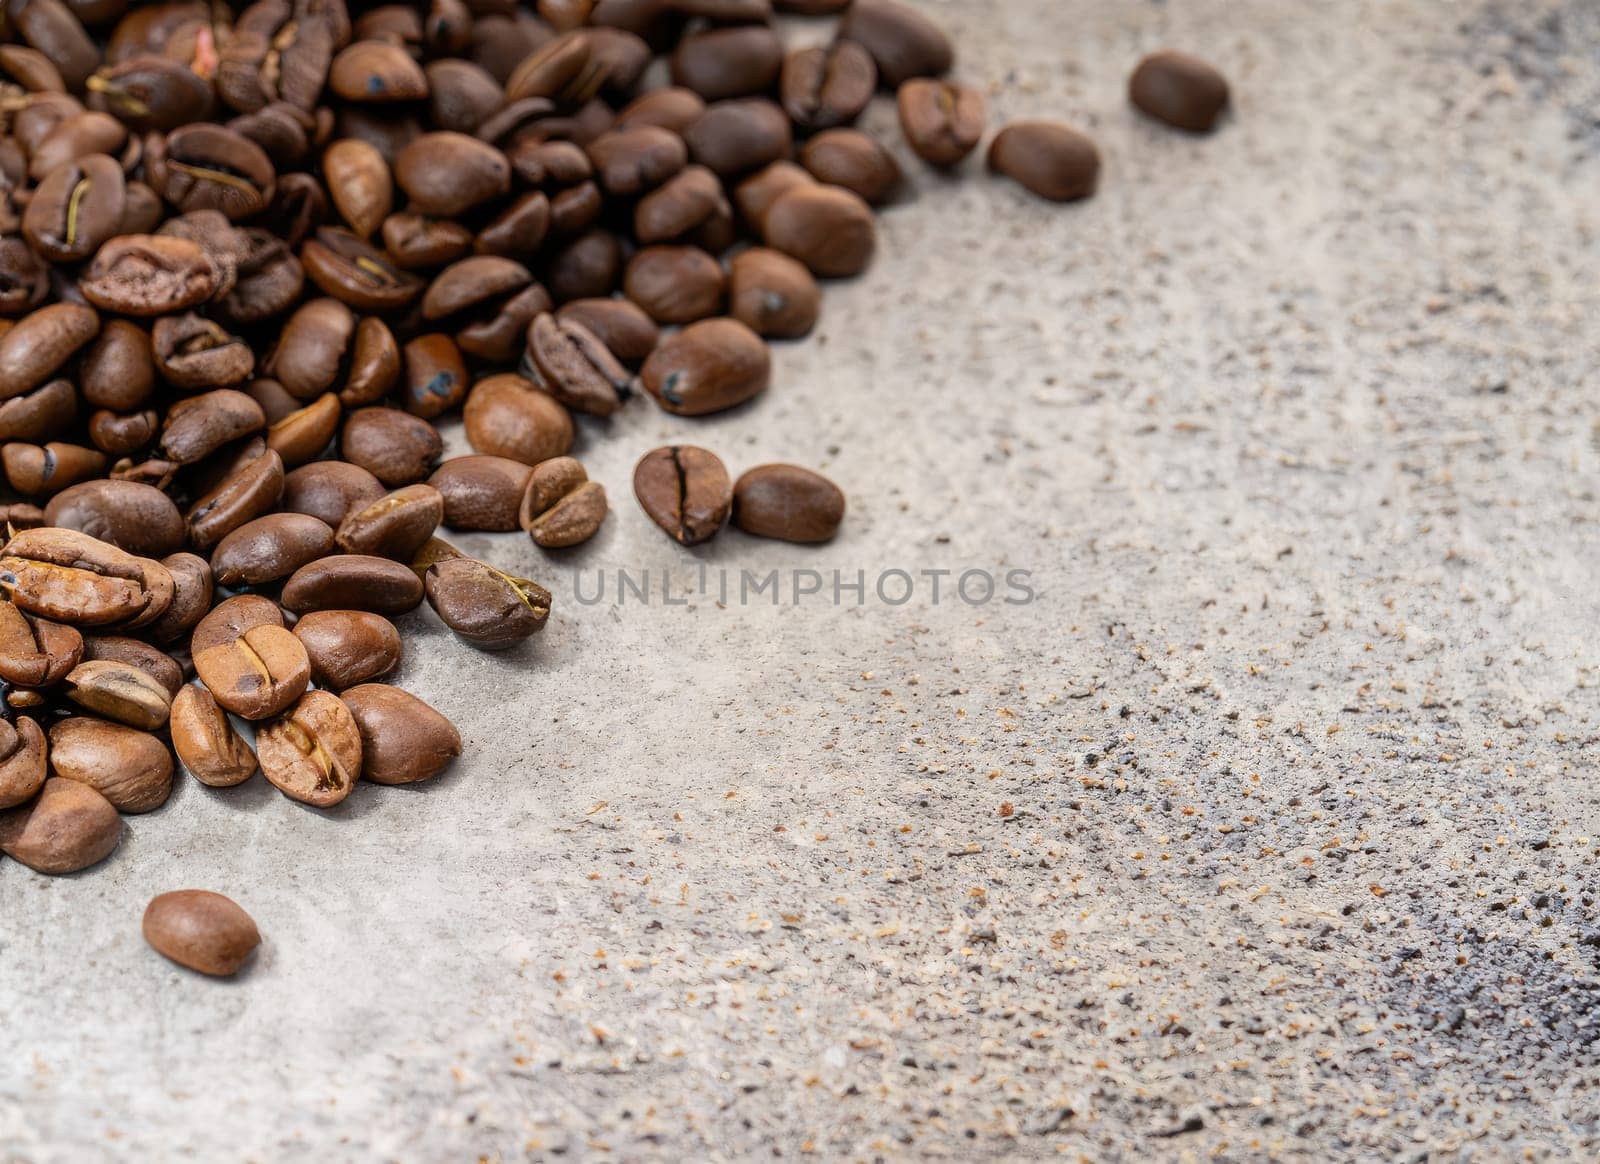  coffee seed frame with white copy space background. AI Generated. by PeaceYAY